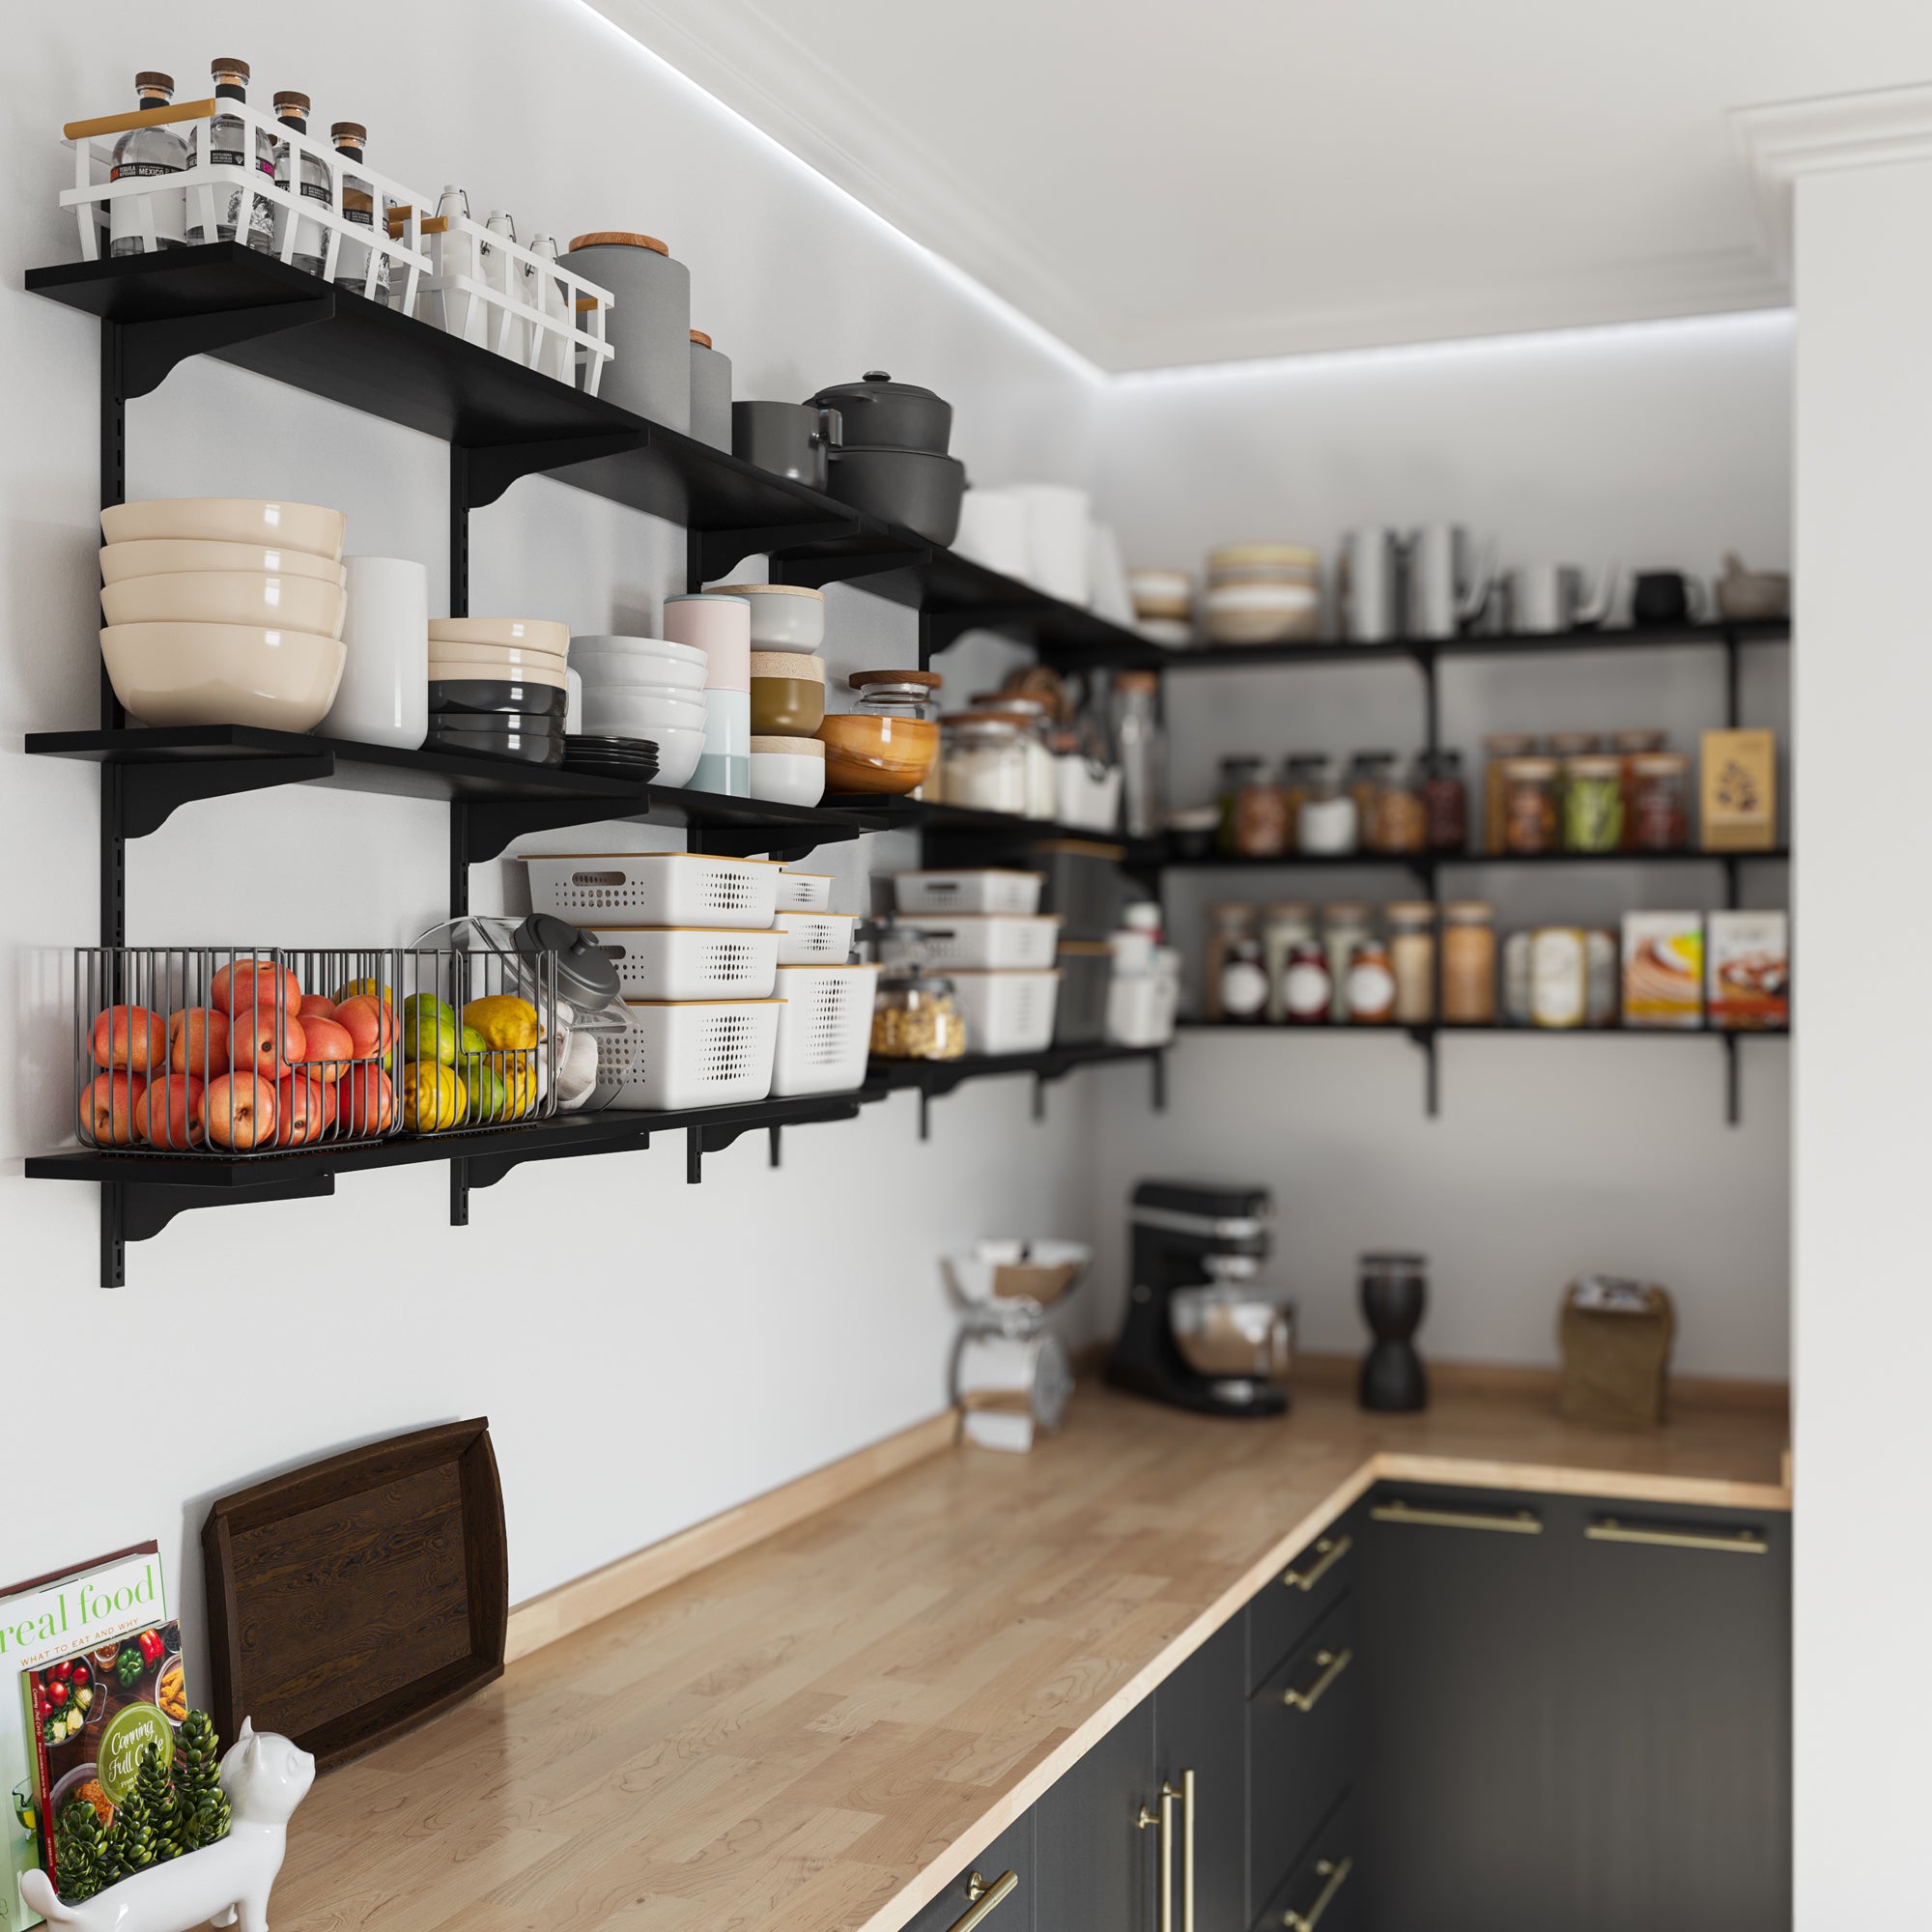 Pantry shelves filled with cookware, canned goods, creating a highly organized kitchen storage.